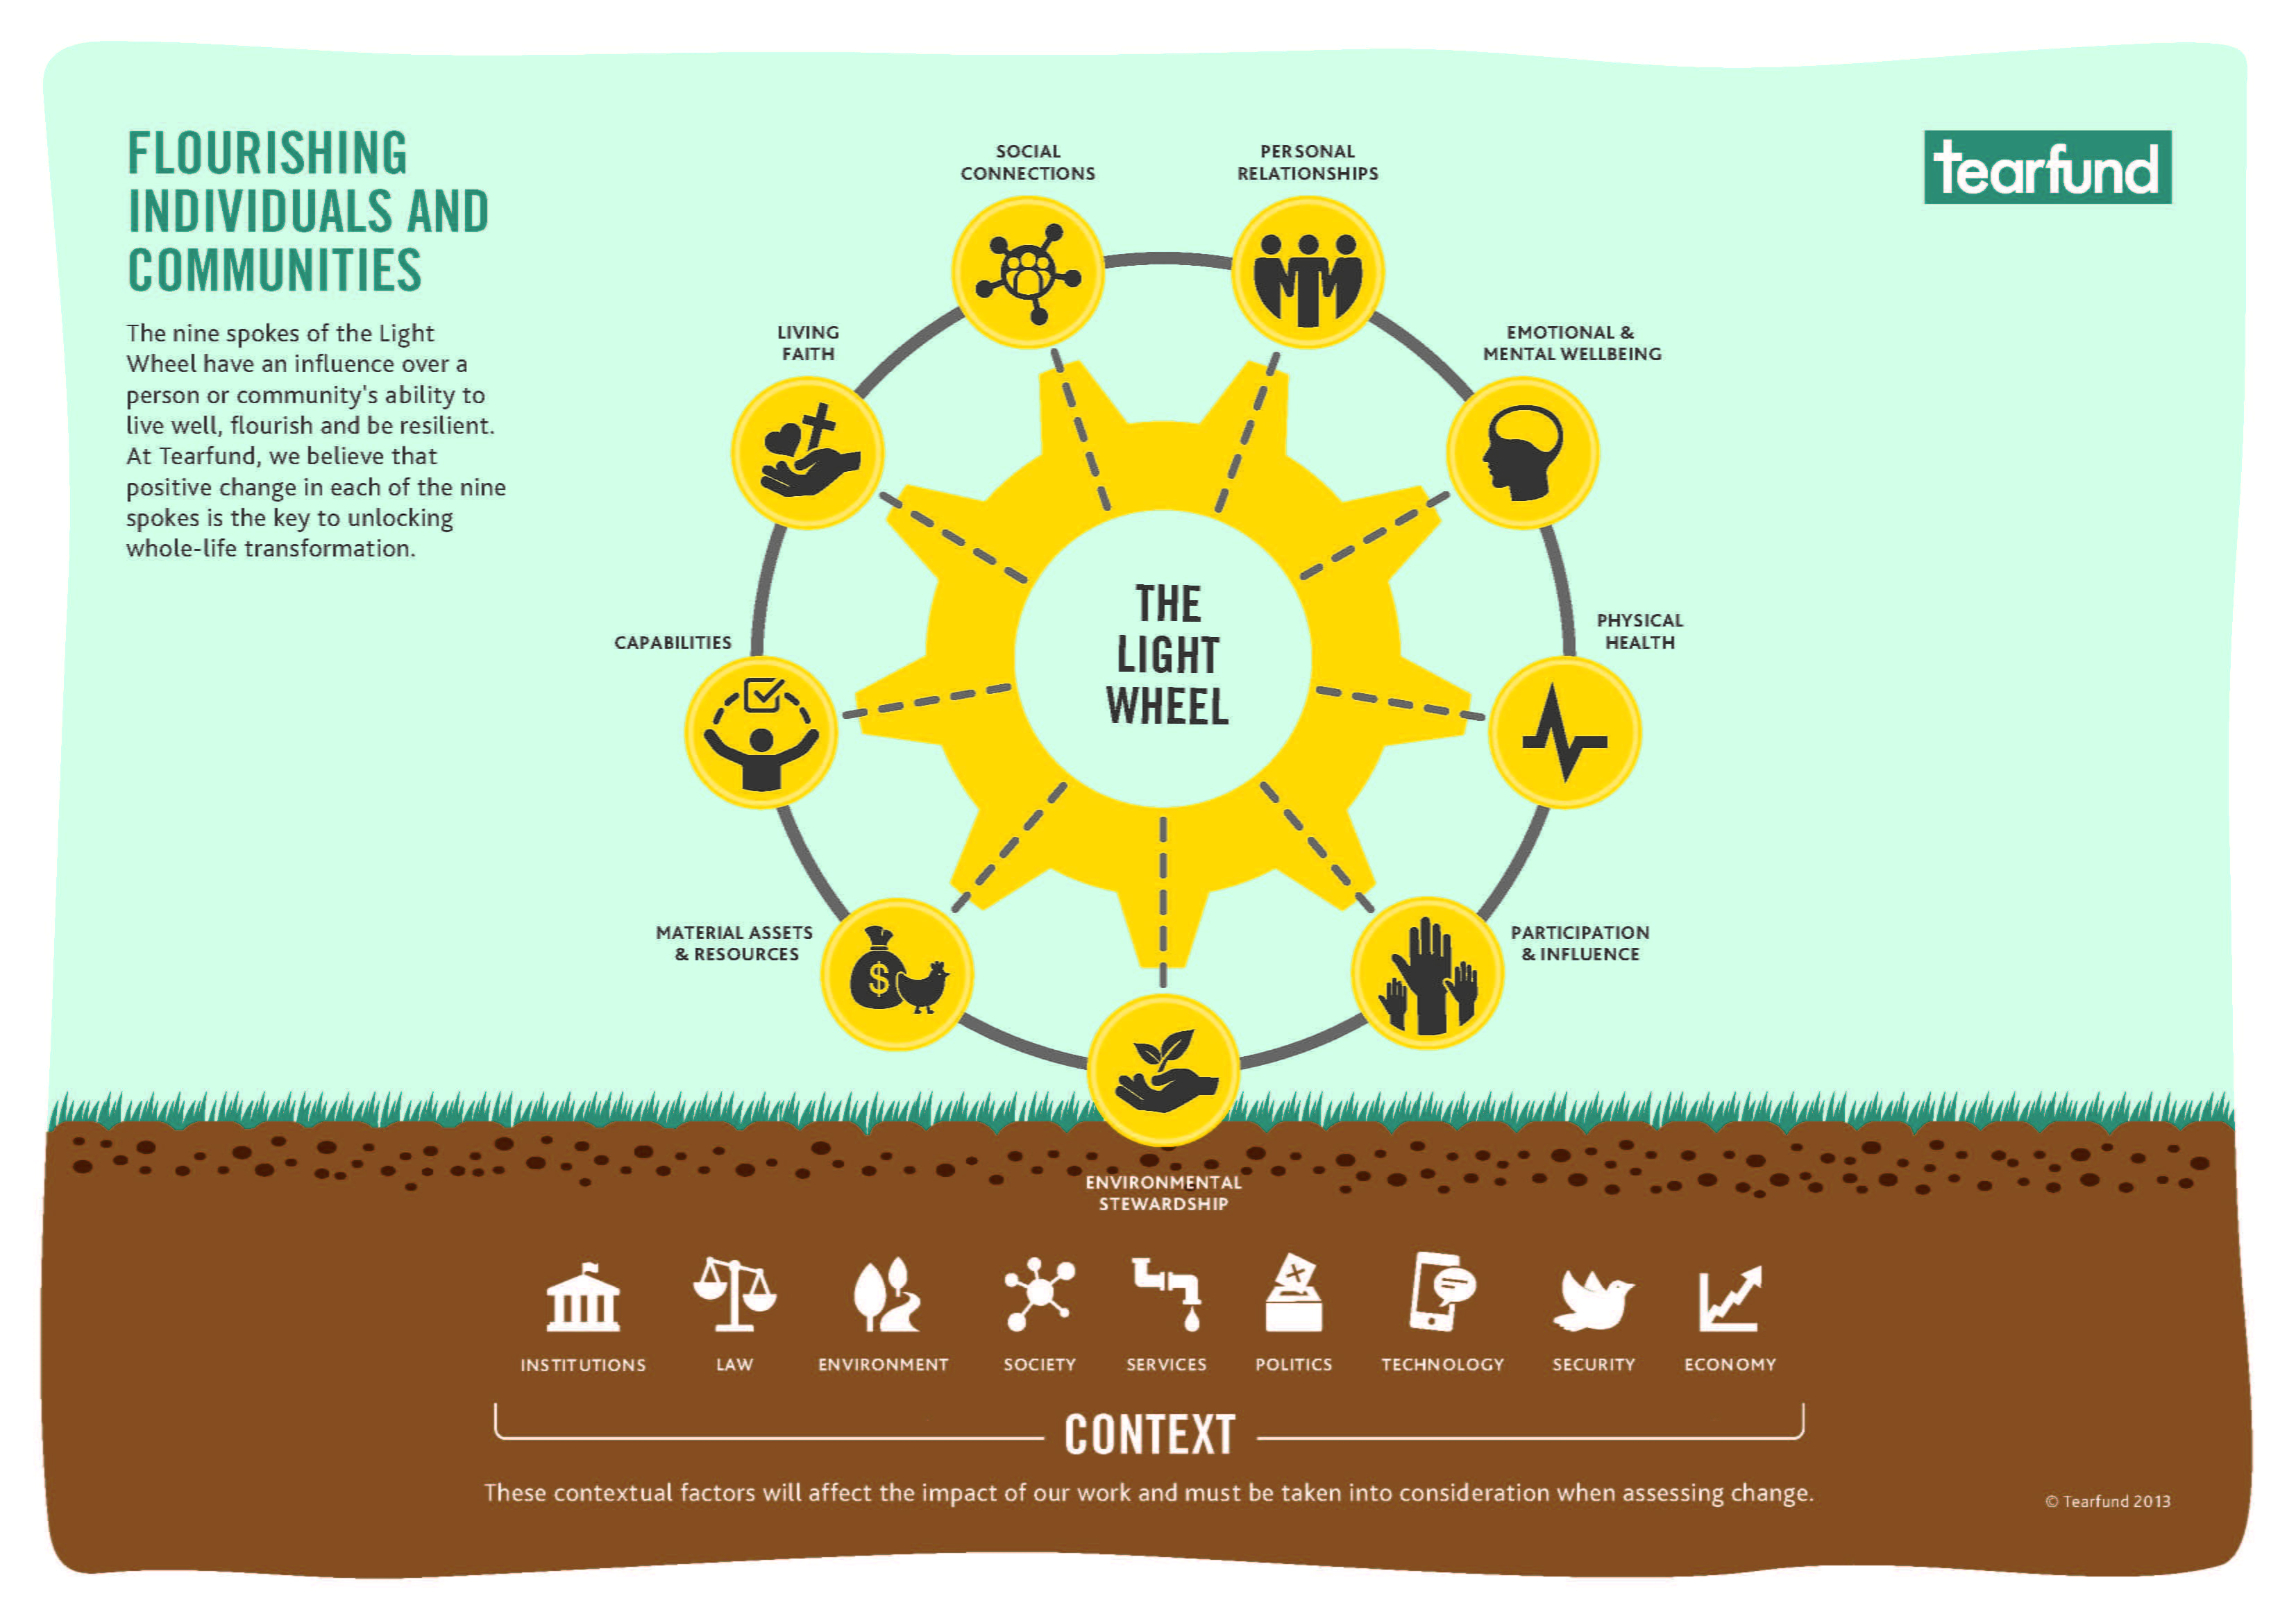 A diagram of a yellow wheel with nine spokes, each of which represents an 'aspect of wellbeing' that contributes to human flourishing and the transformation of people's lives and communities